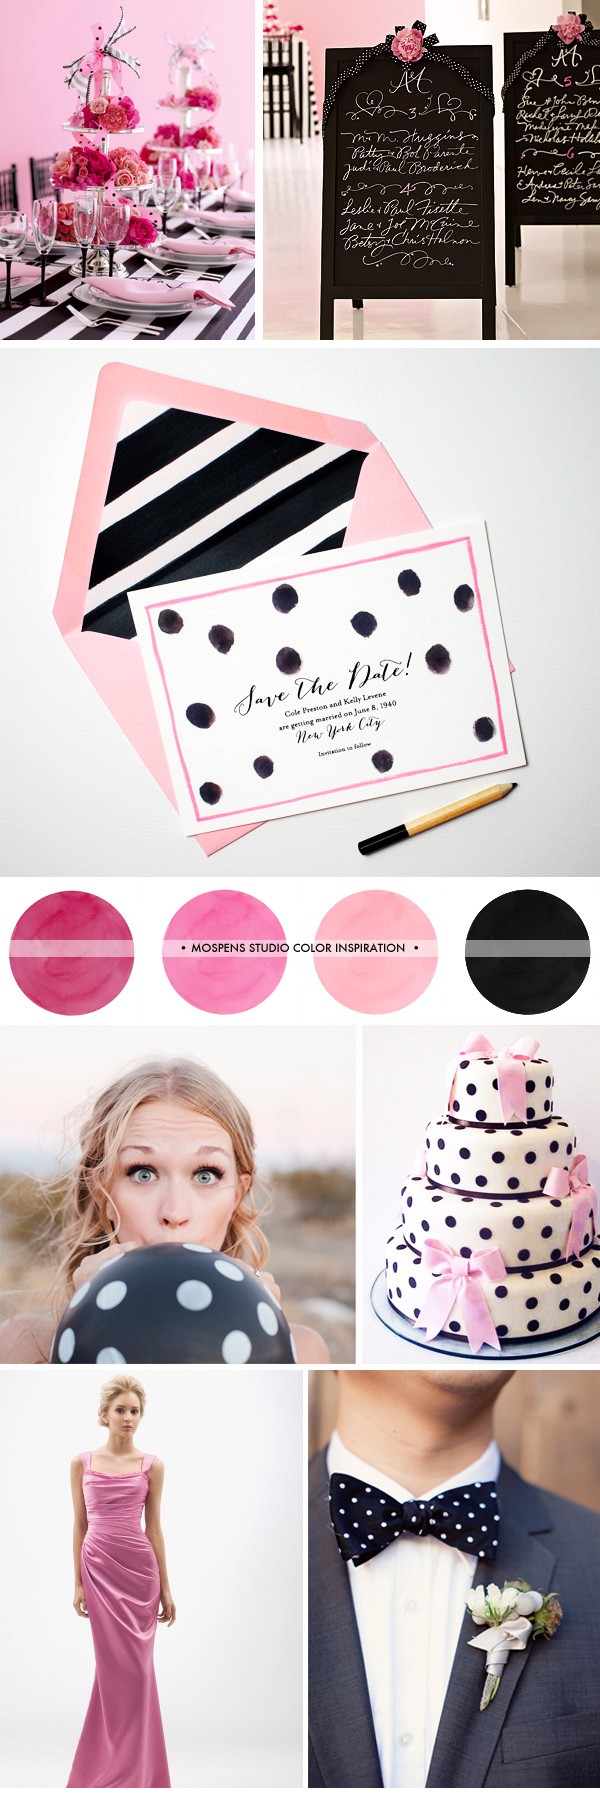 Pink, Black and White Wedding Ideas with Polka-Dots | Mospens Studio